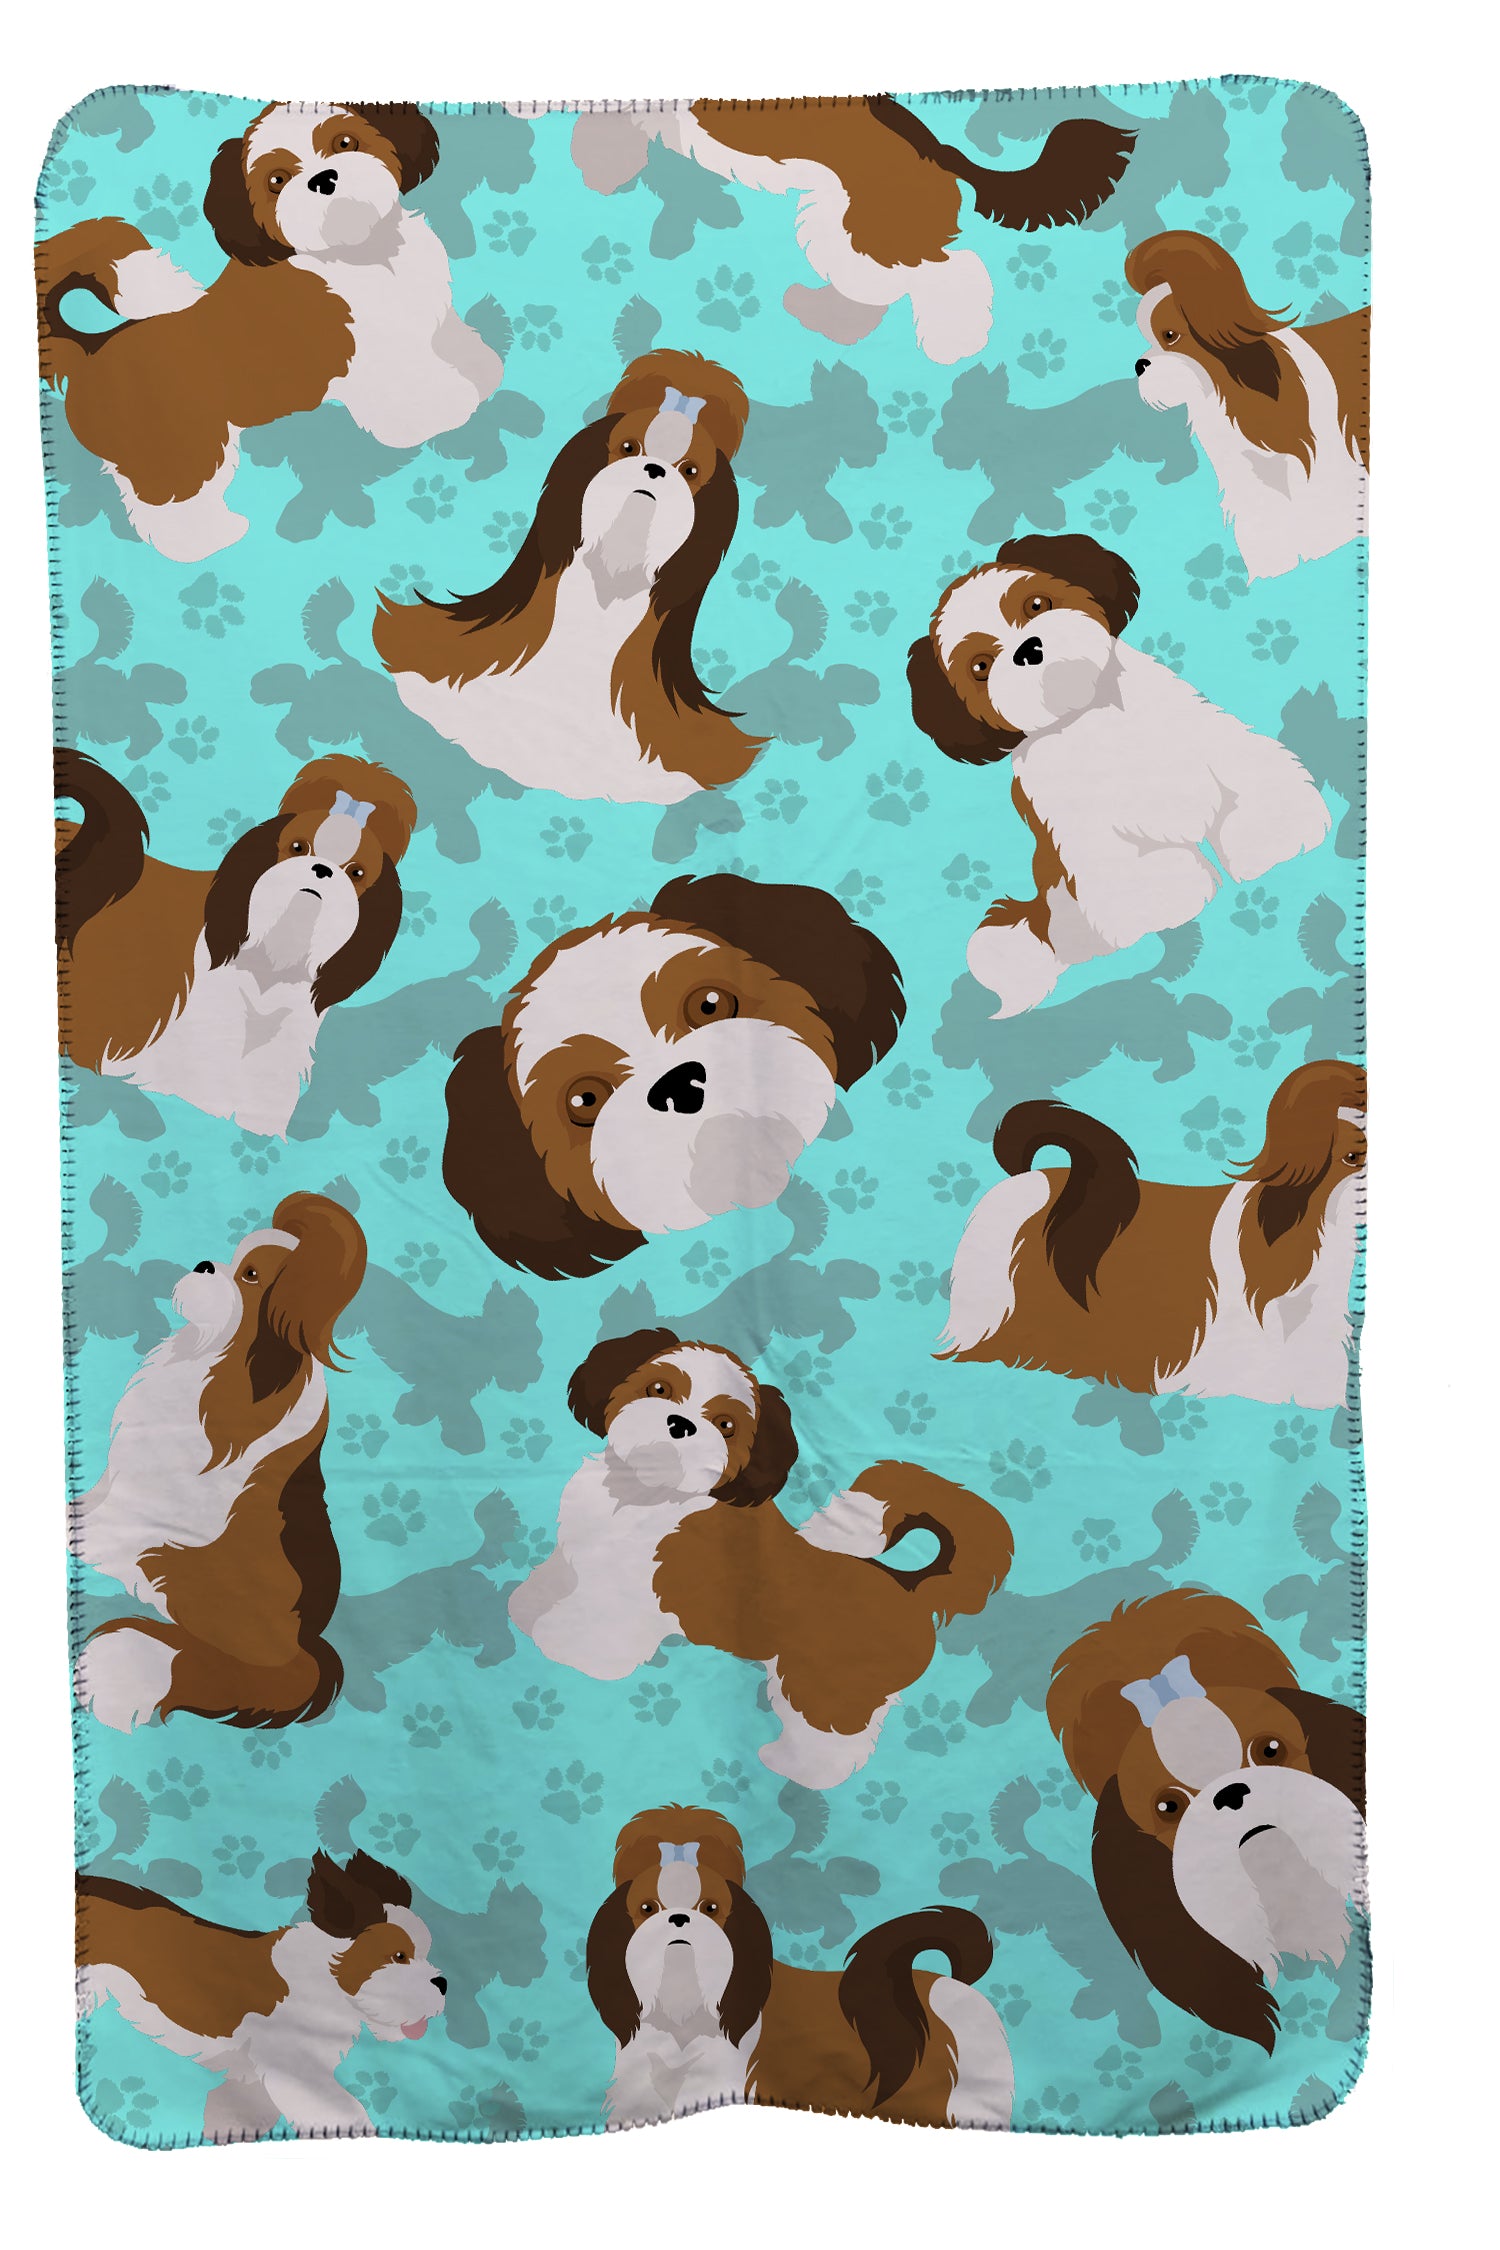 Buy this Shih Tzu Soft Travel Blanket with Bag